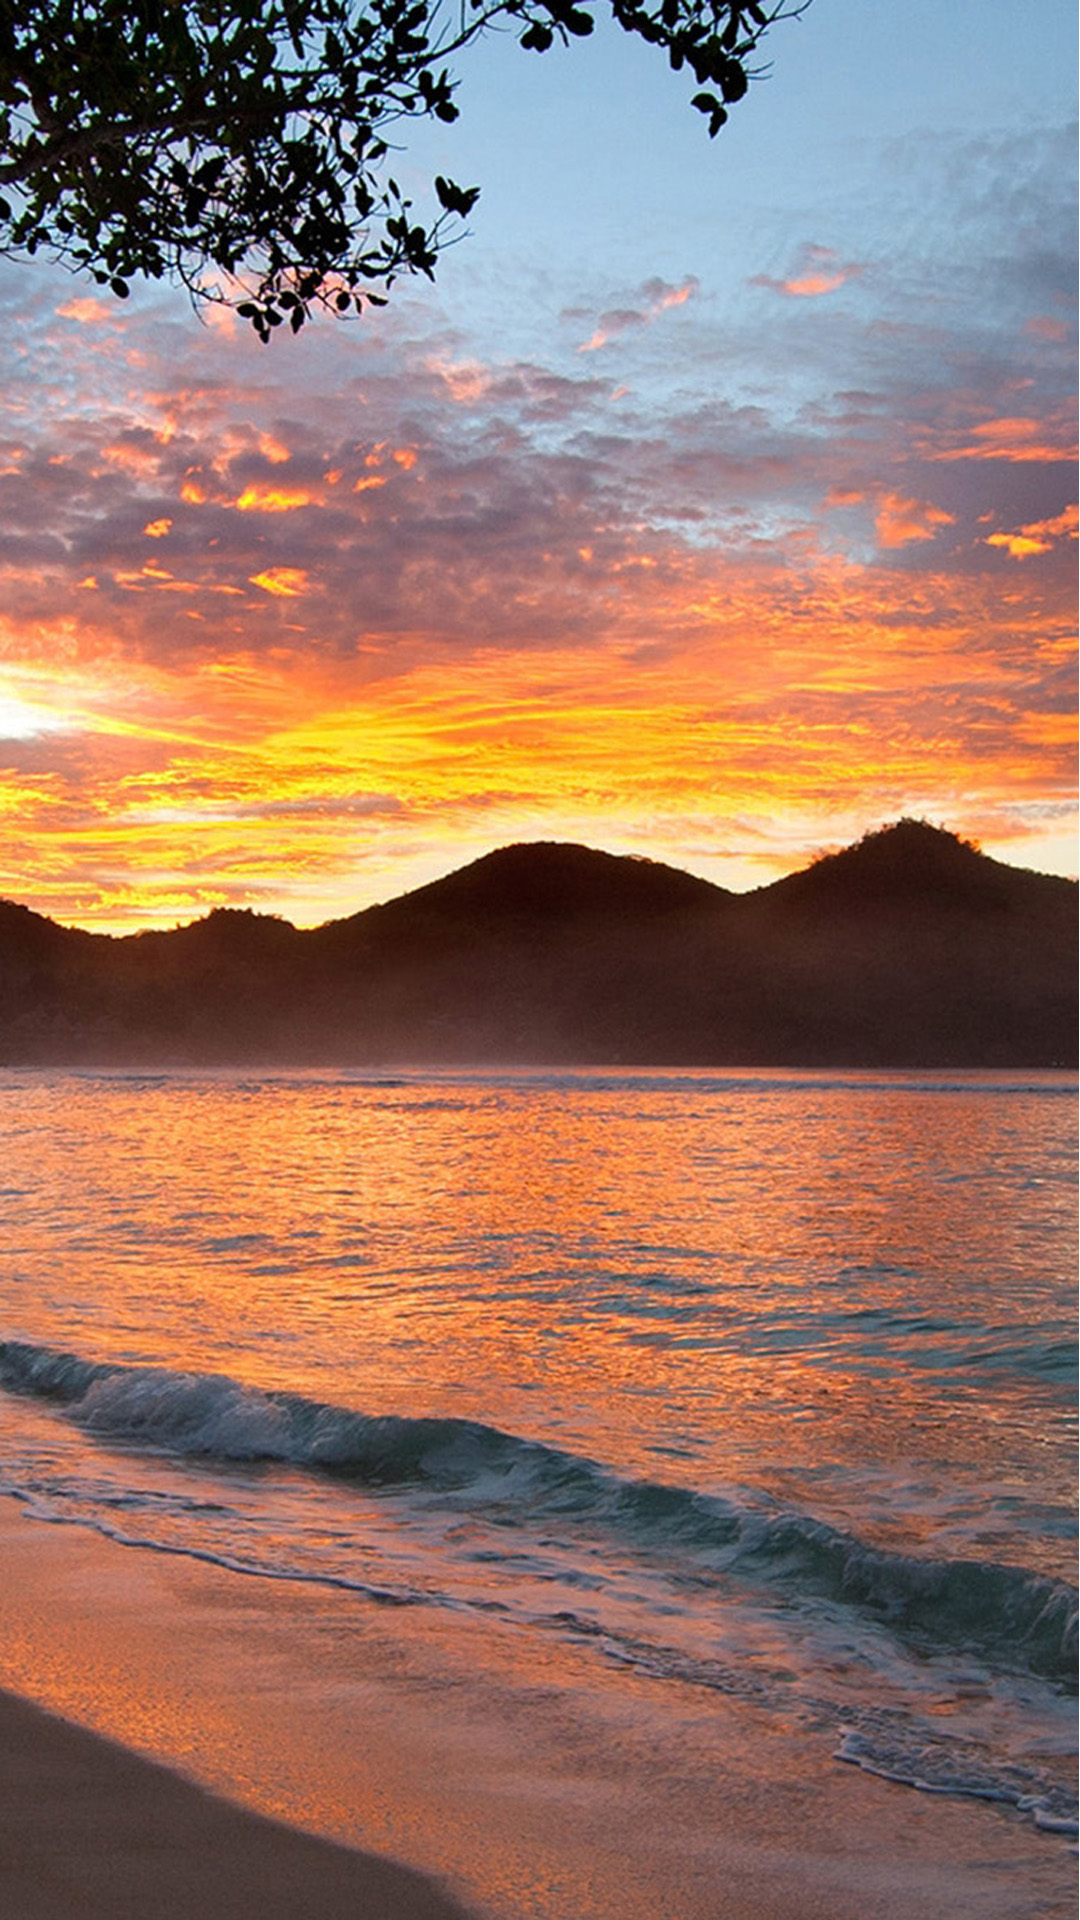 Sunset with mountains on beach Android wallpaper